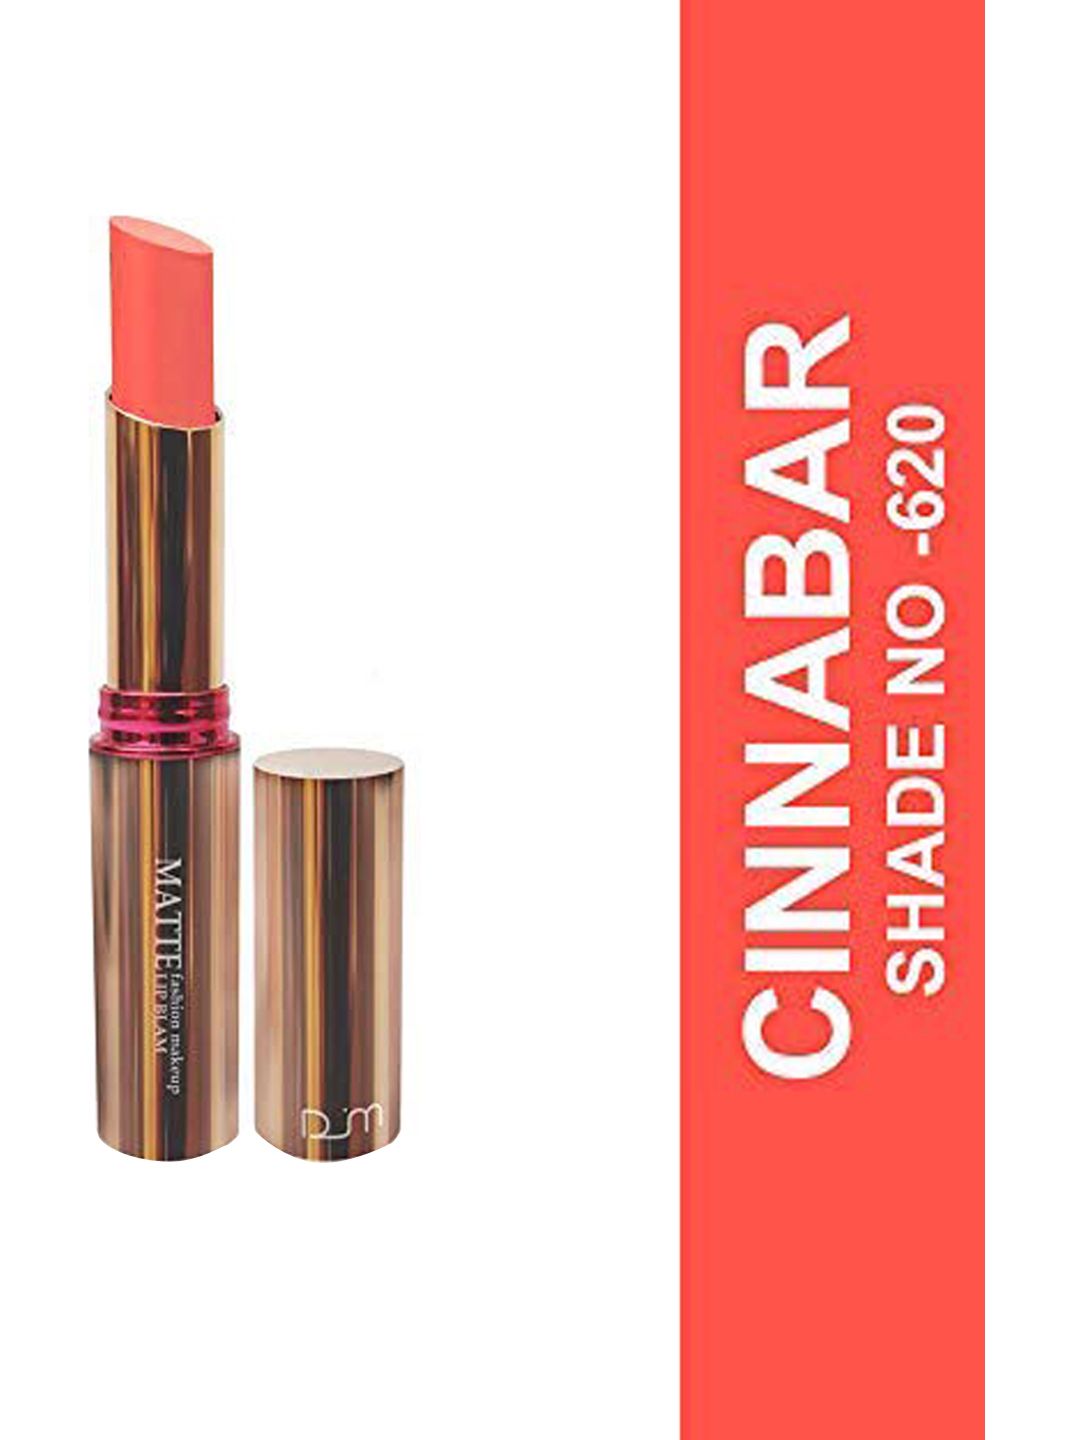 Seven Seas Matte With You Lipstick - Cinnarbar 620 Price in India